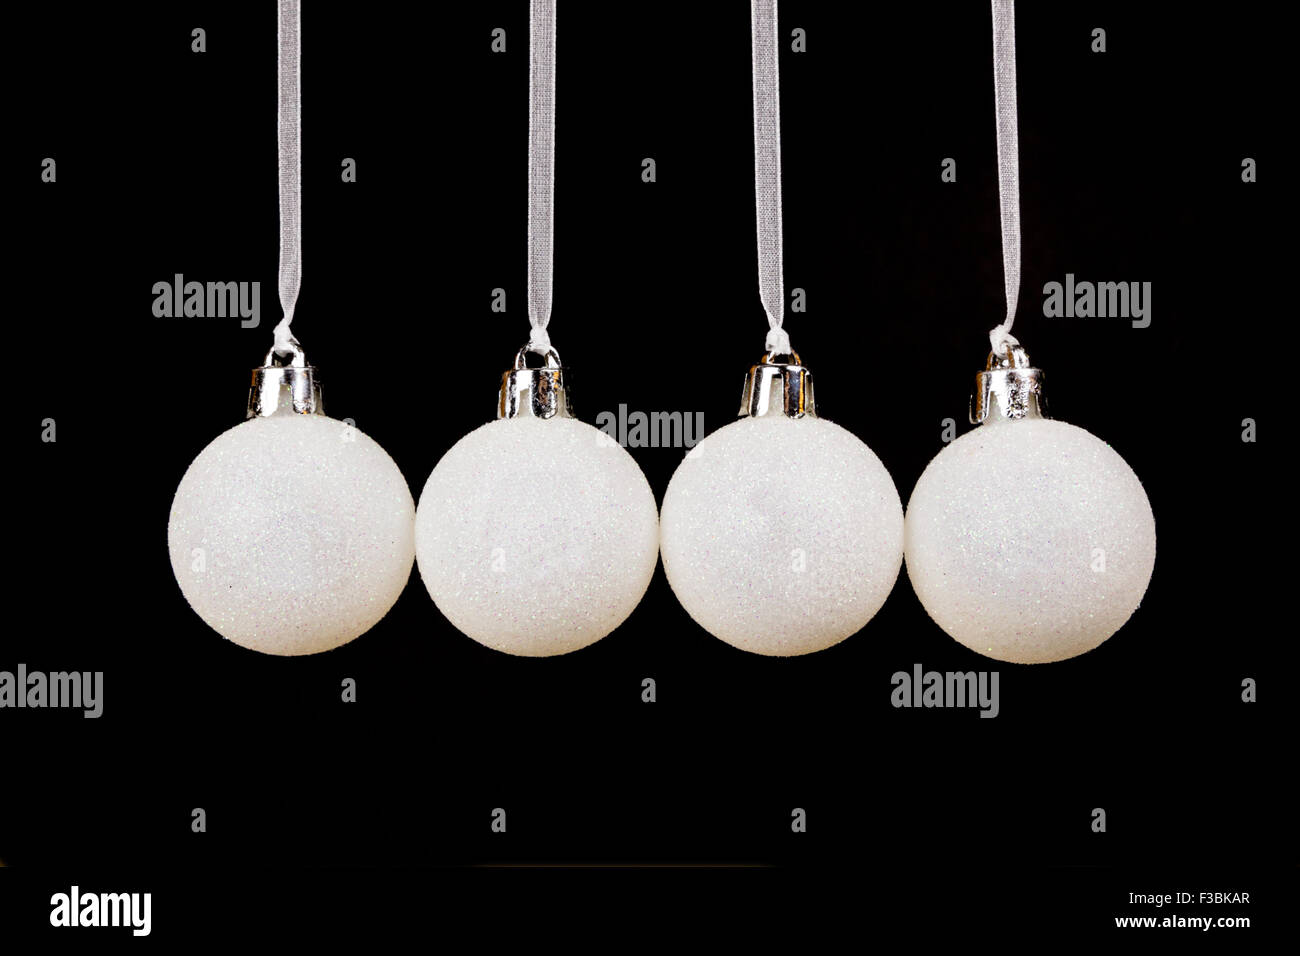 Four white christmas balls hanging in a horizontal row isolated on black background Stock Photo